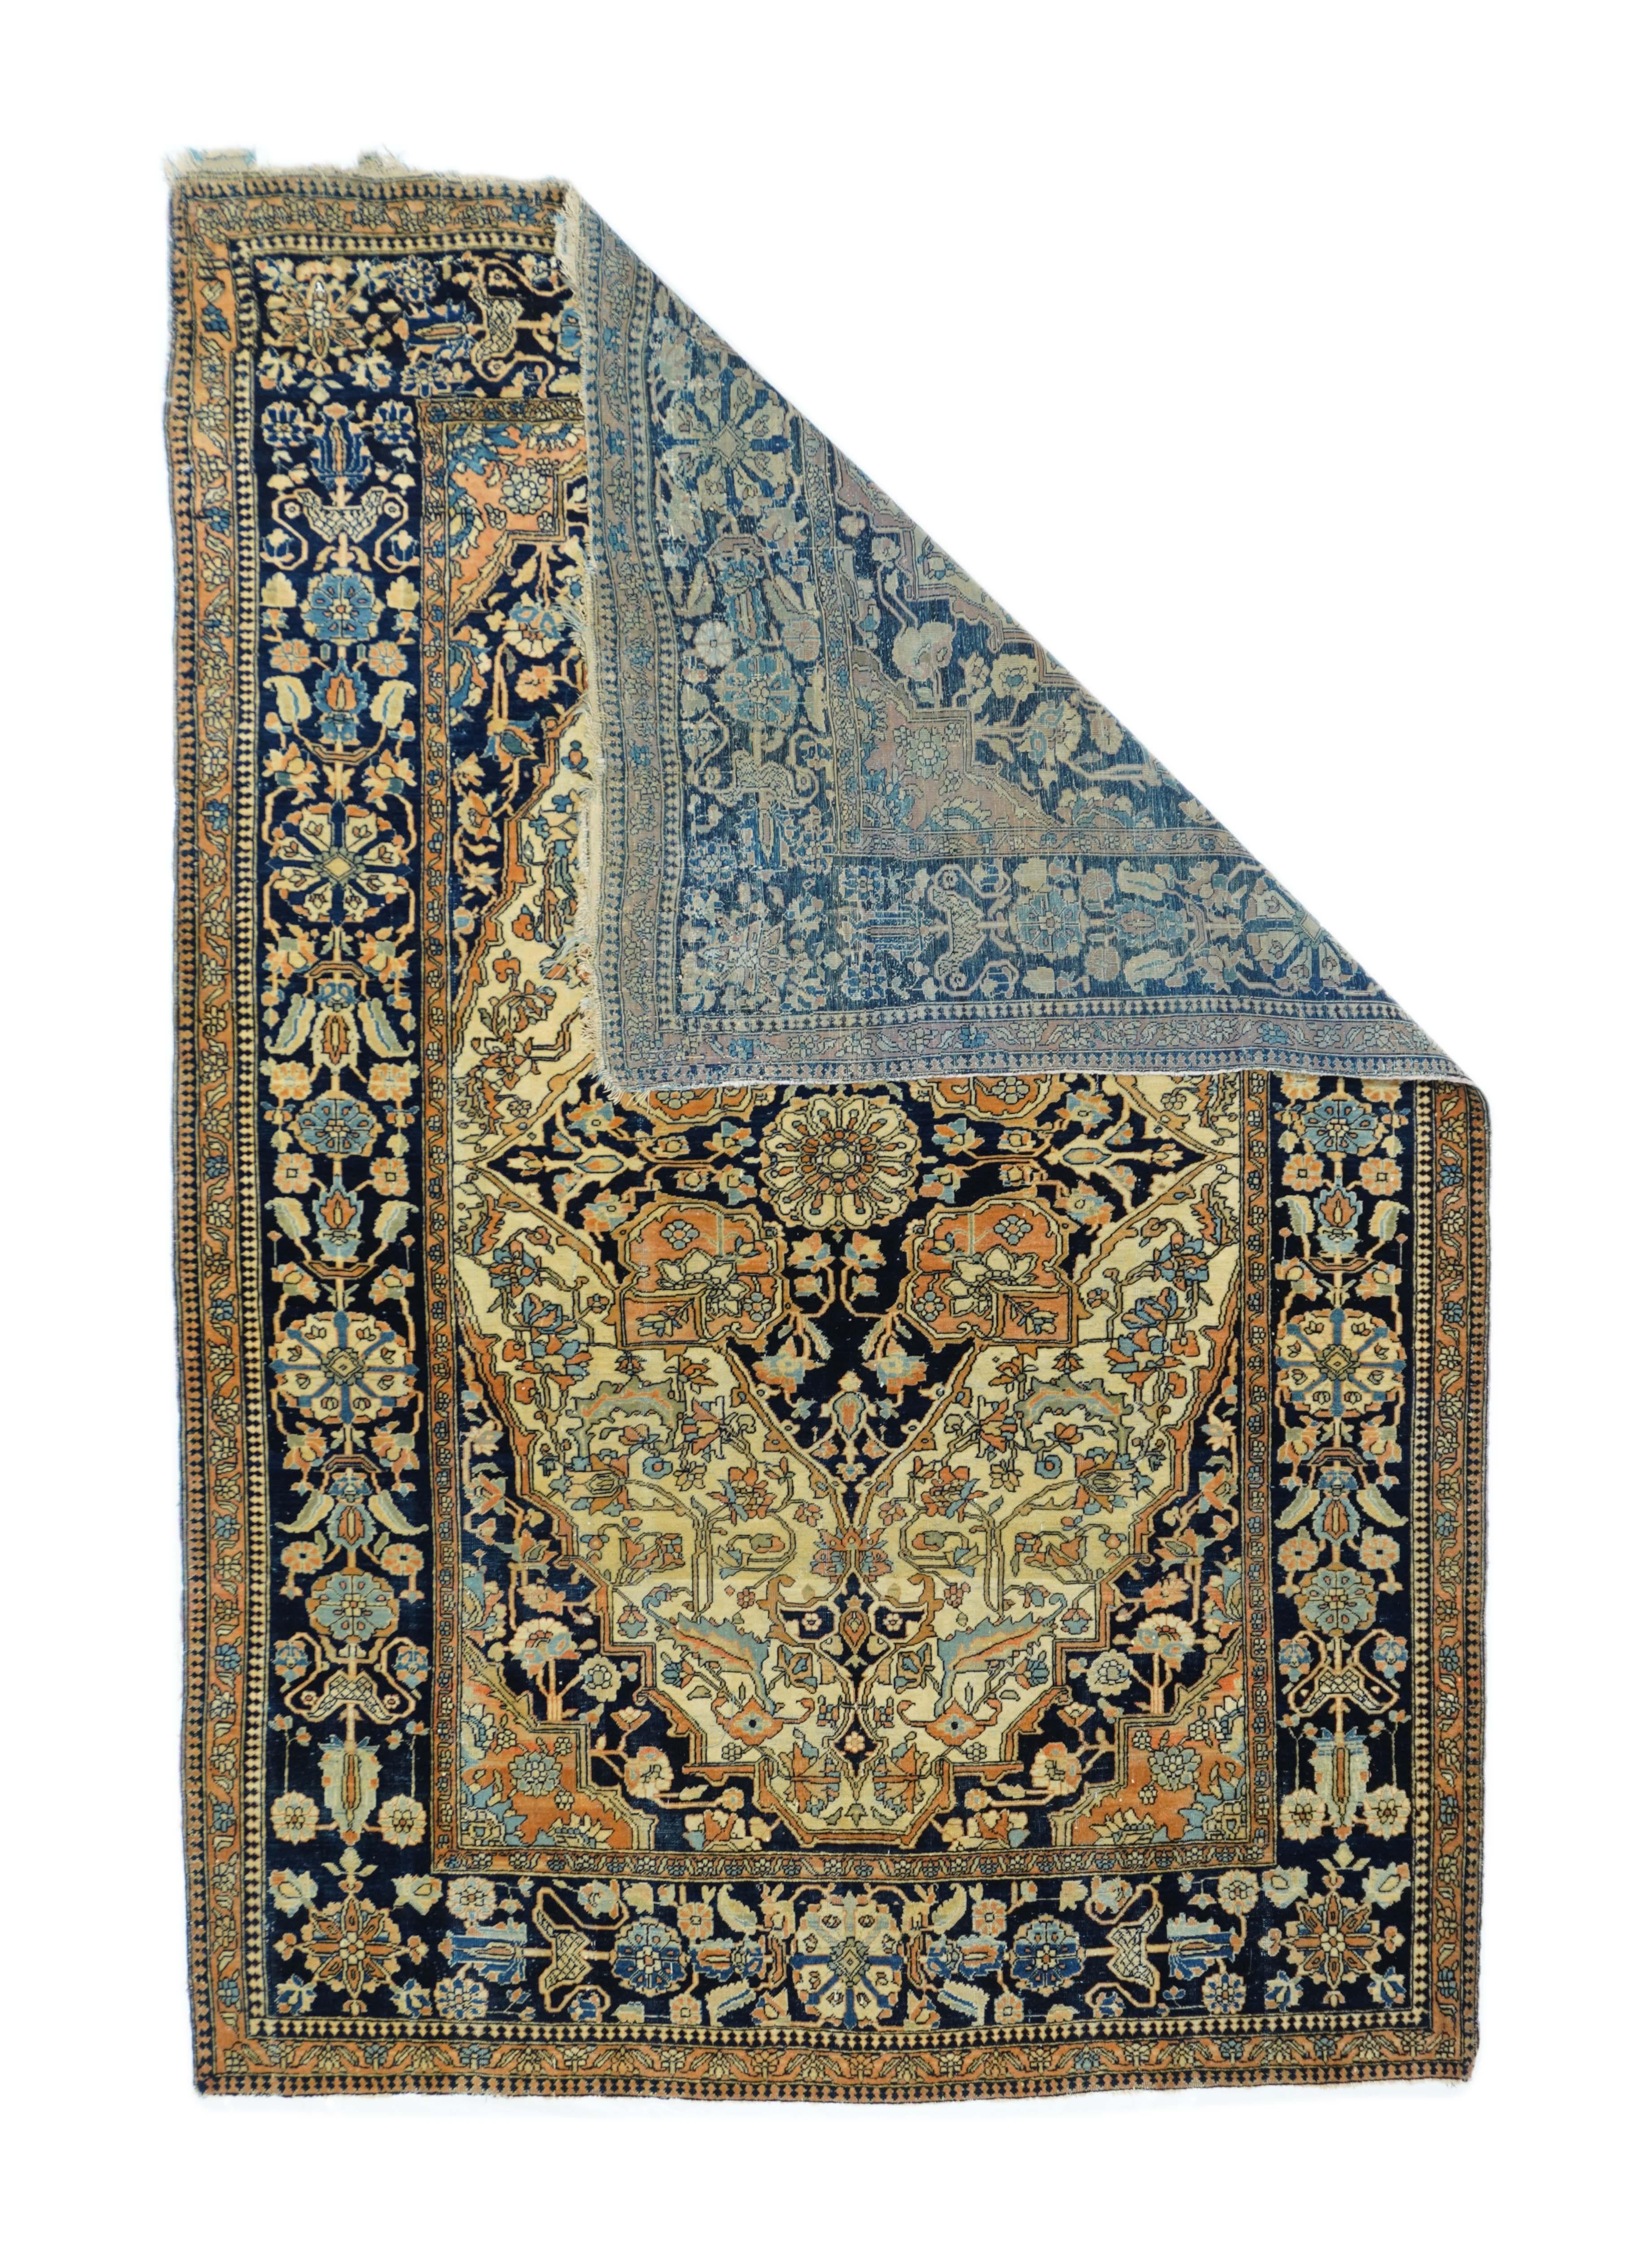 Antique Mohtasham Kashan rug 4'4'' x 6'3''. The oval cream field shows a navy octogramme medallion with rust palmette radiations, together with navy and rust corners. Stained glass drawing of serrated leaves, palmettes and broken stems. Navy borders